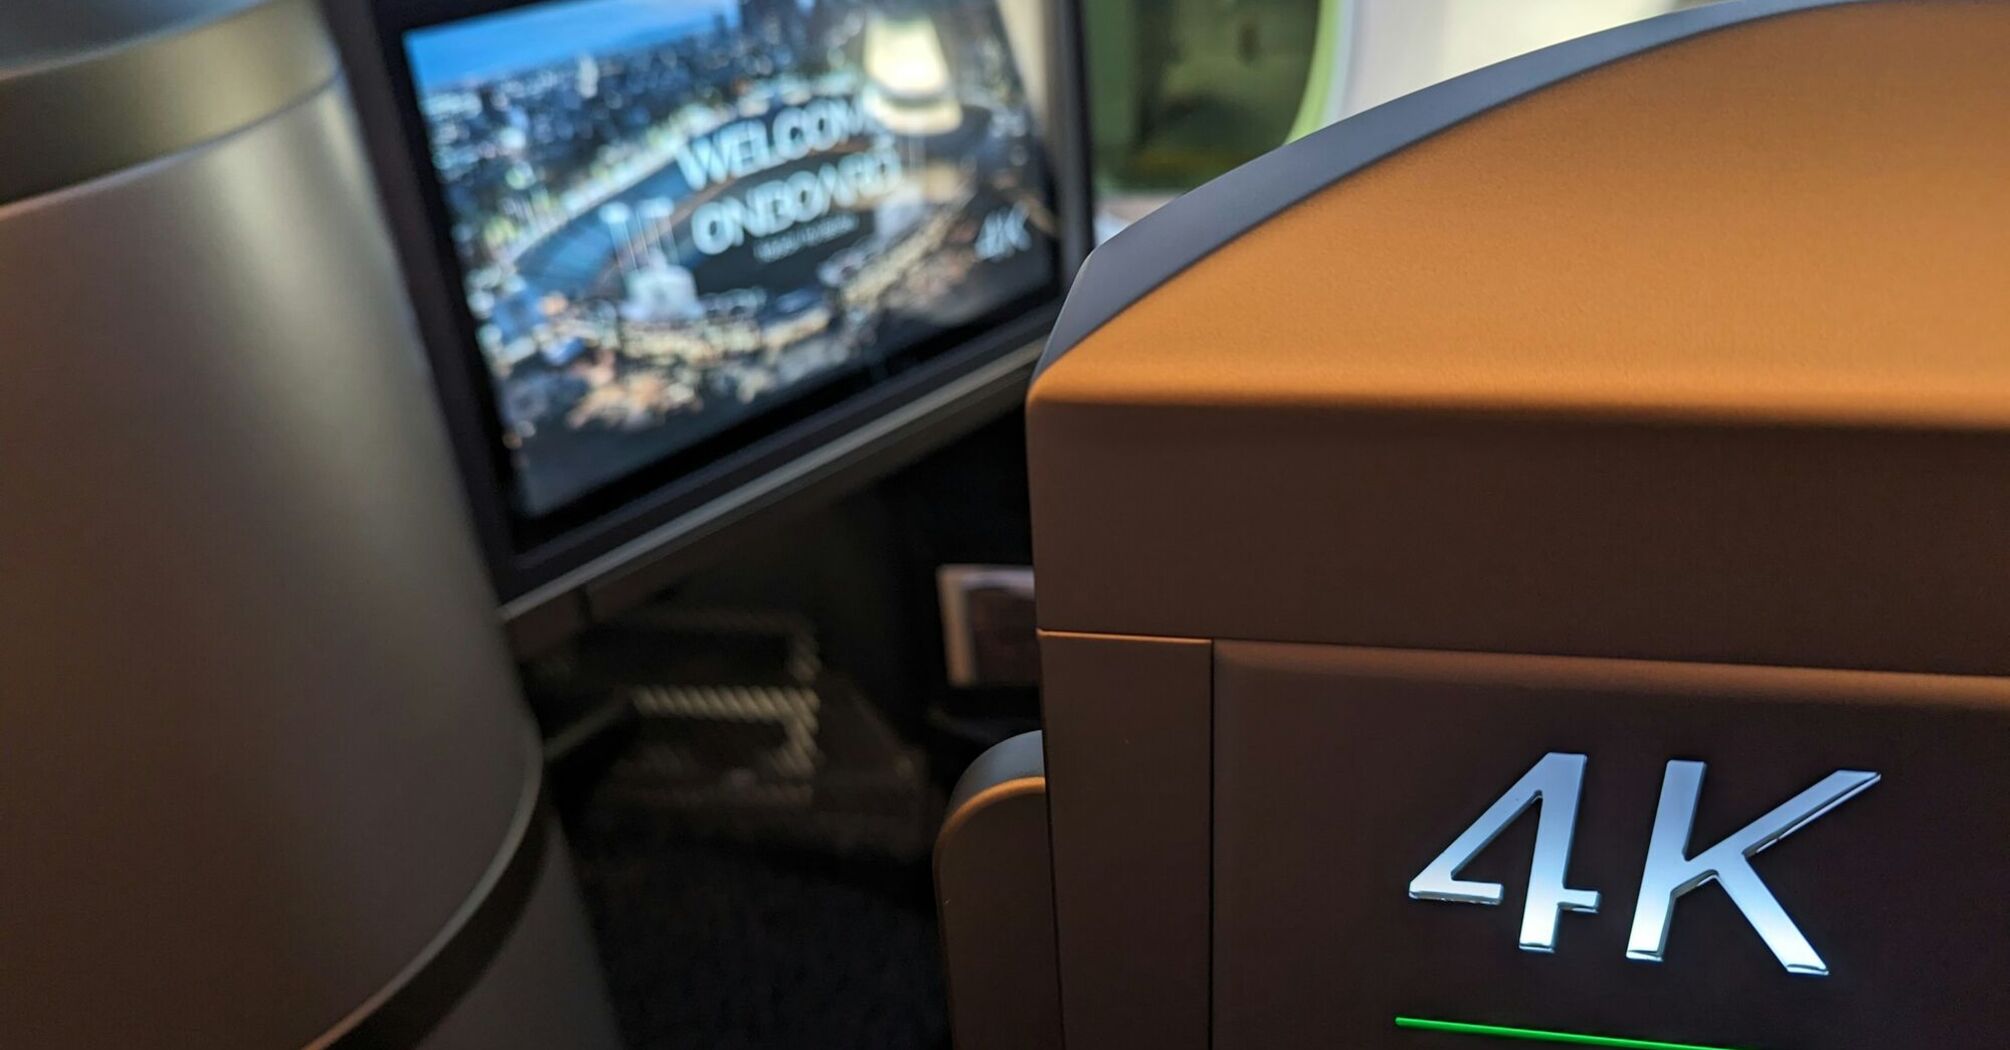 STARLUX Airlines business class seat with '4K' insignia on the A350 aircraft